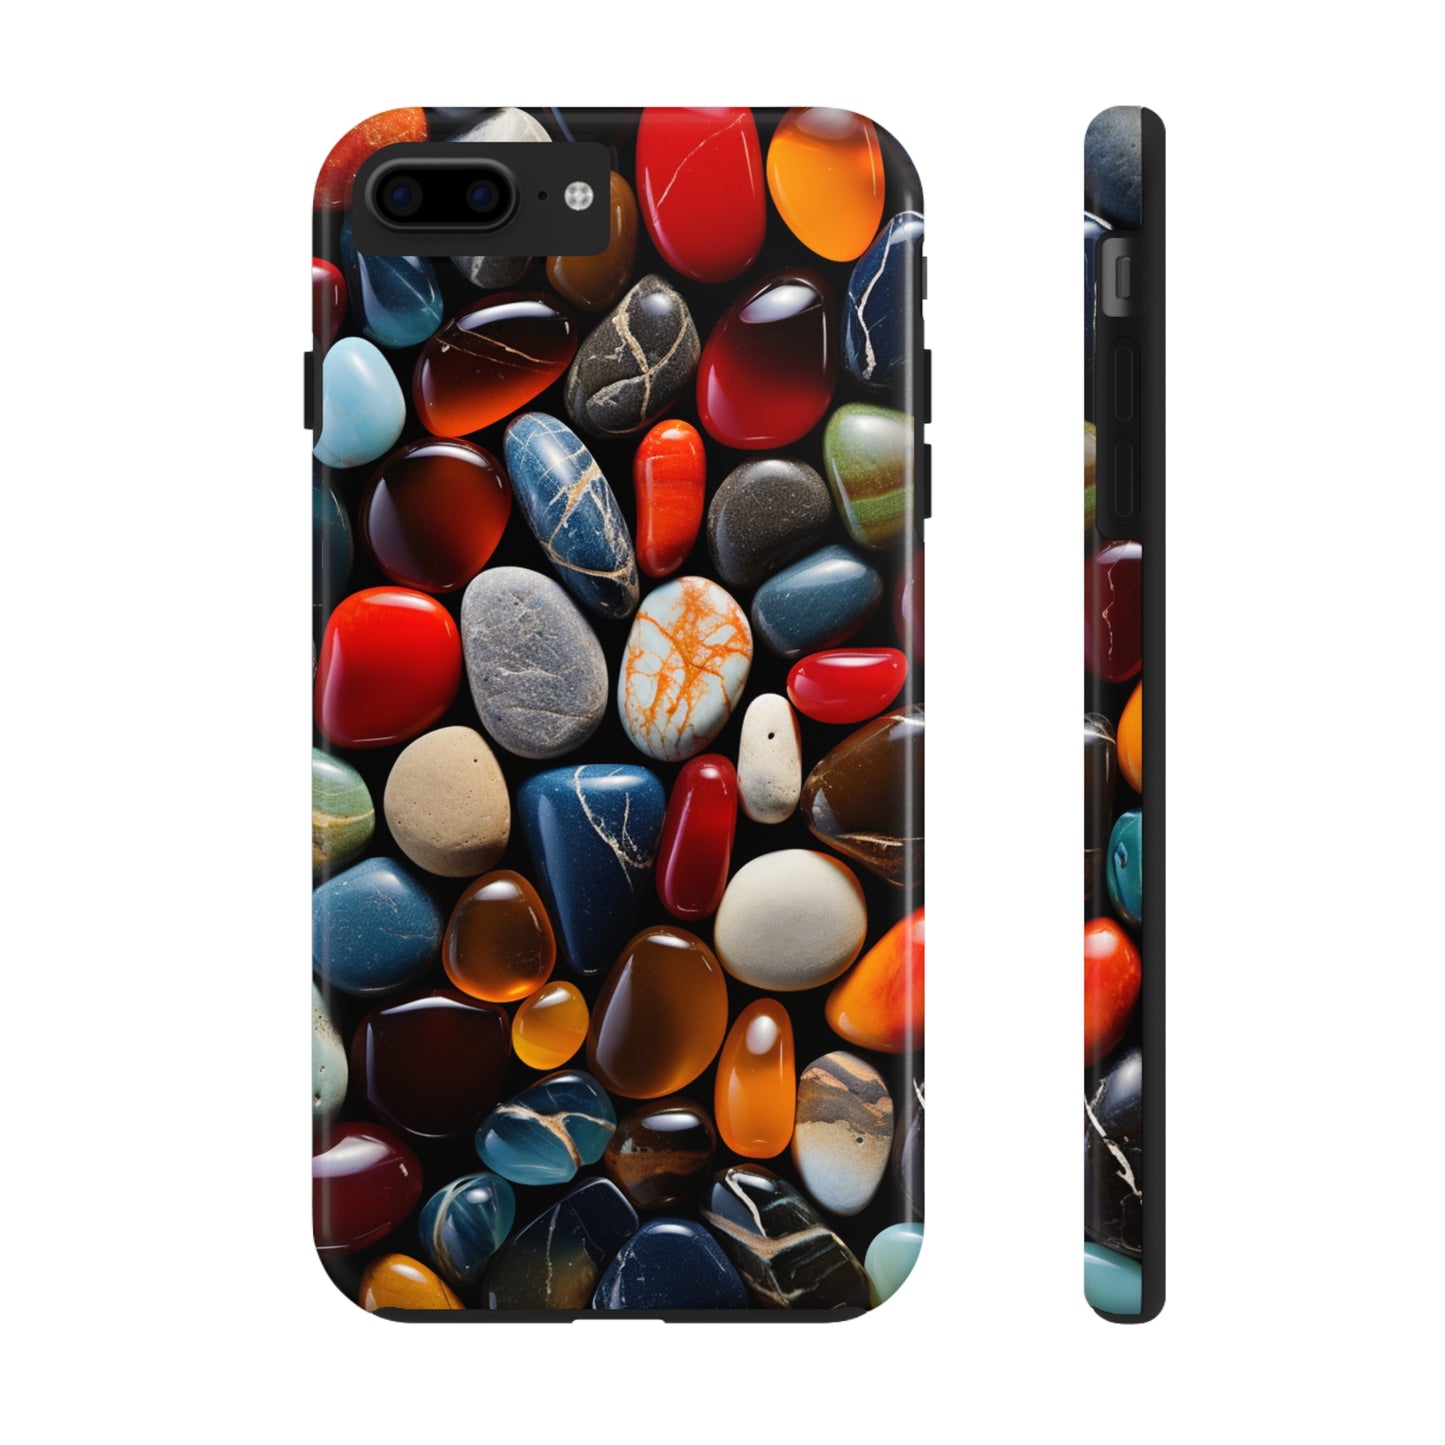 Glass Beach Rocks iPhone Case | Coastal Elegance and Protection | iPhone 11, 12, 13, SE 2020 Series